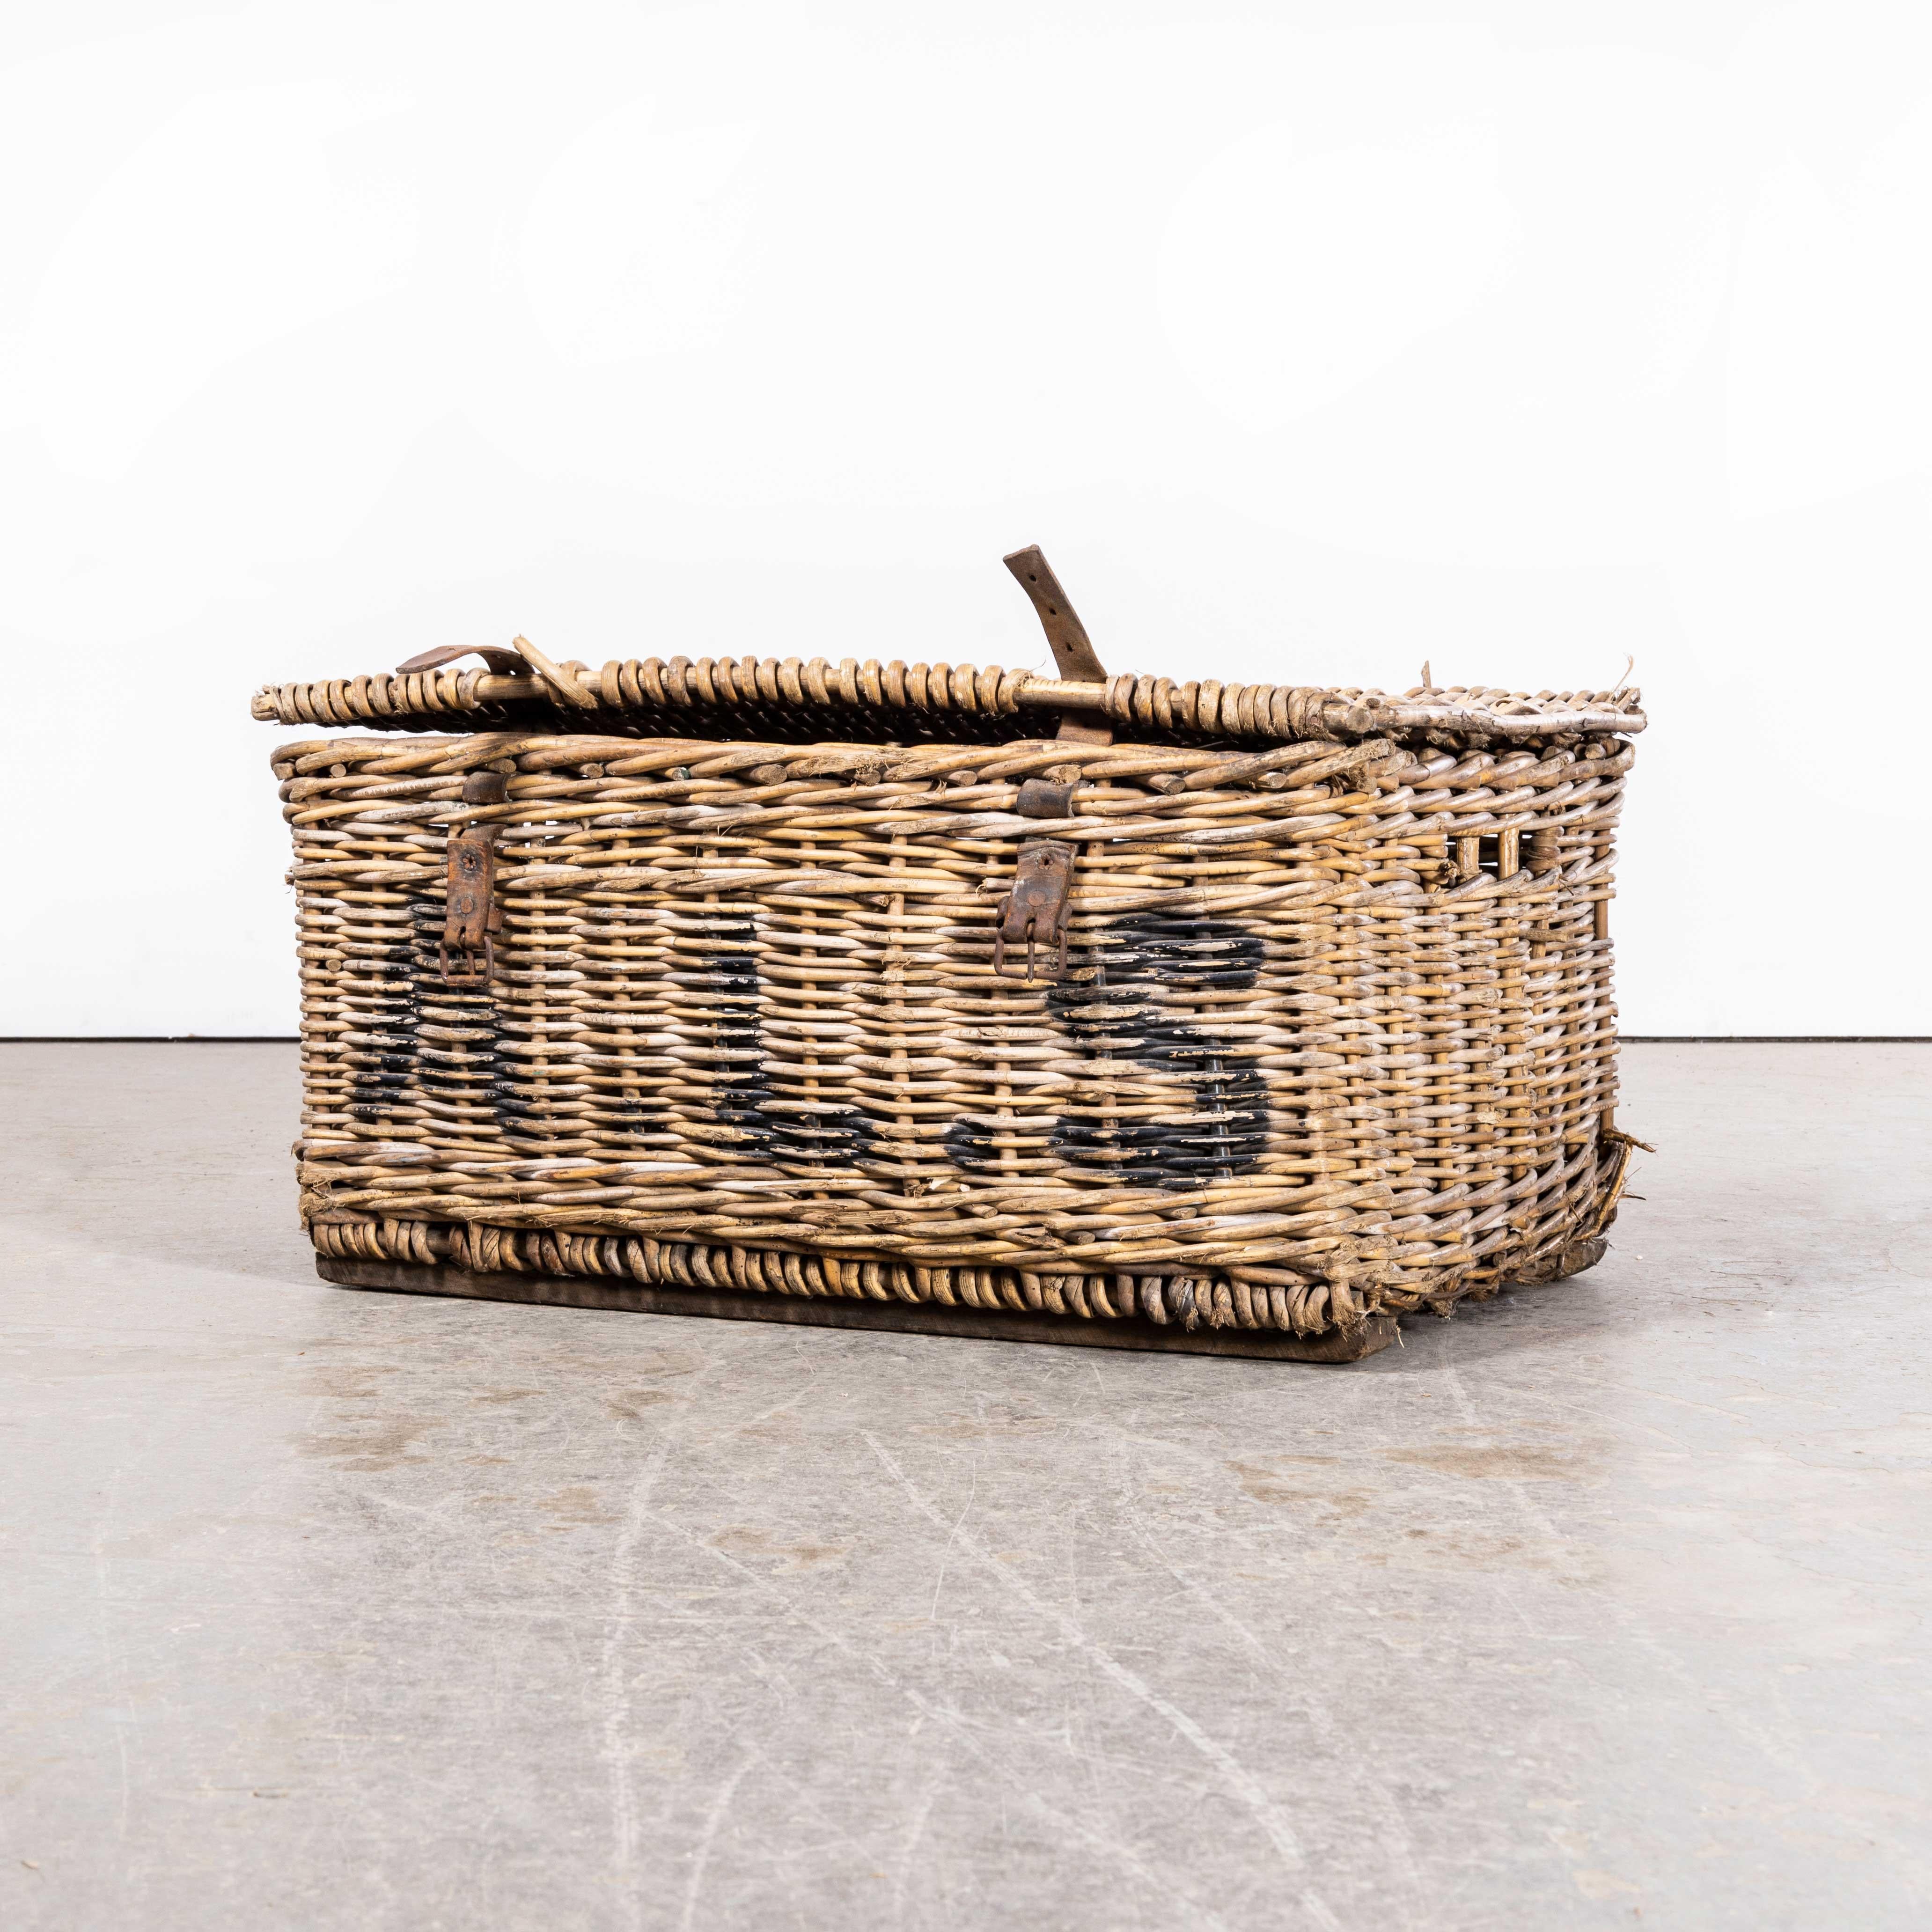 Original French Handmade Willow Hamper
Original French Handmade Willow Hamper. Good honest original French hamper with owners faded branding.

WORKSHOP REPORT
Our workshop team inspect every product and carry out any needed repairs to ensure that